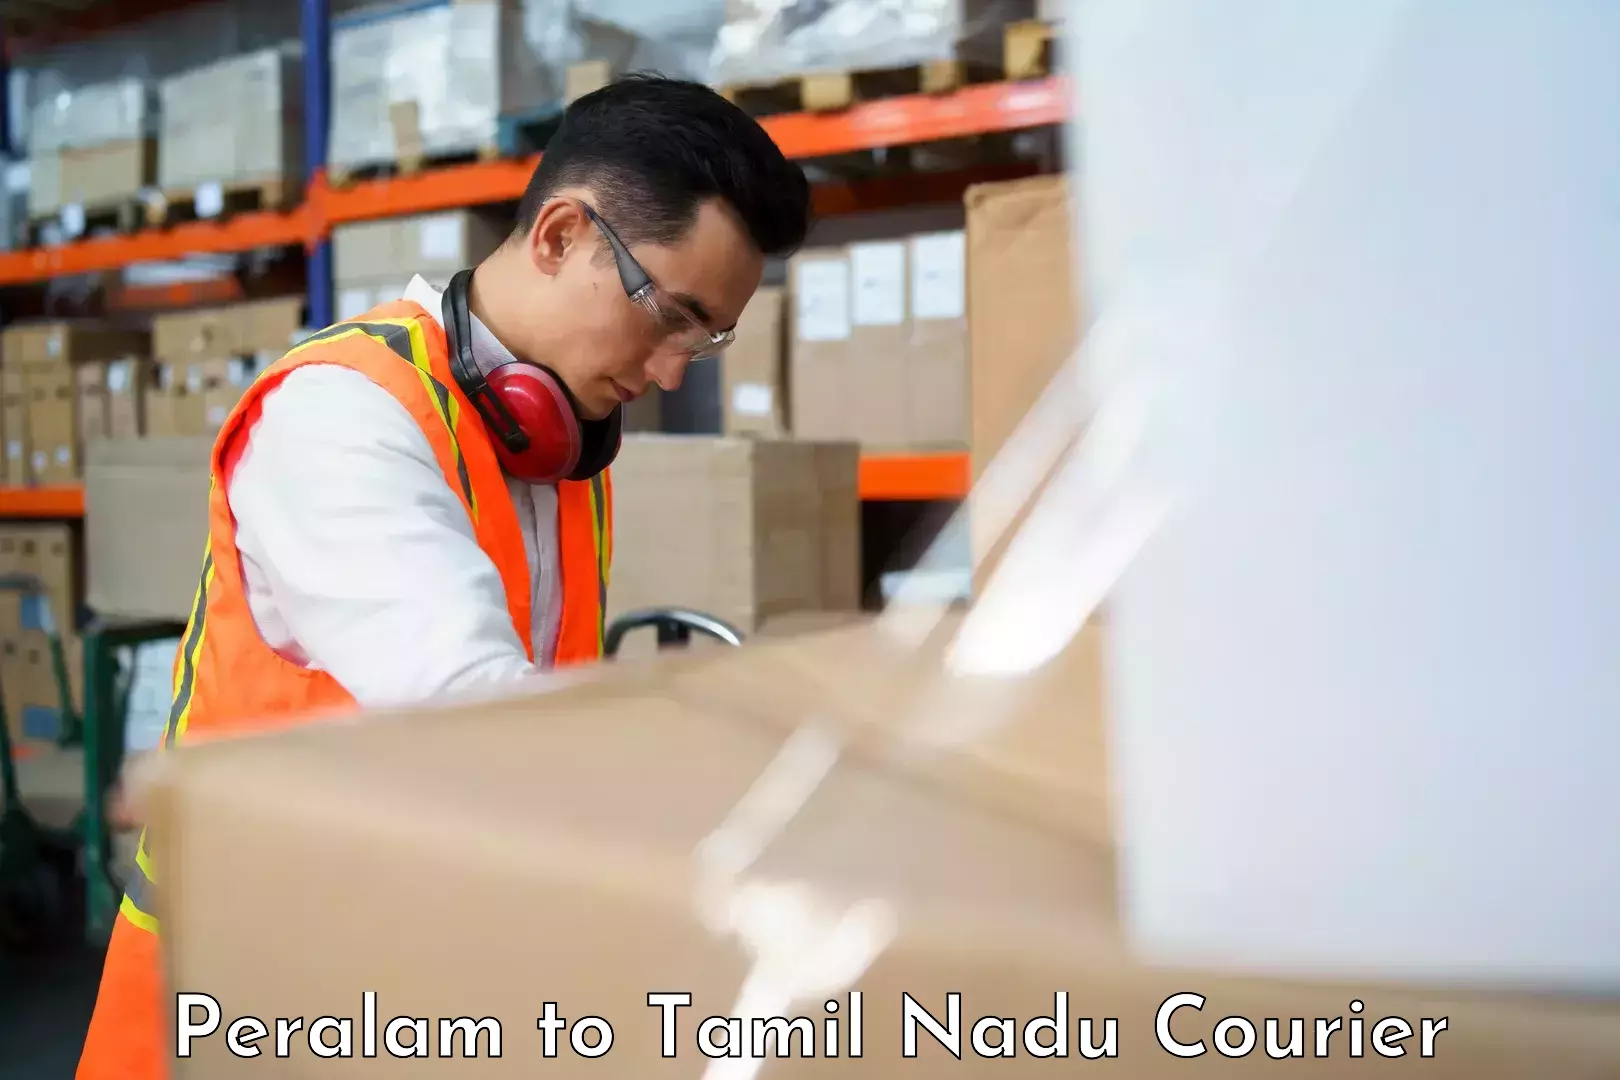 Budget-friendly movers Peralam to Tamil Nadu